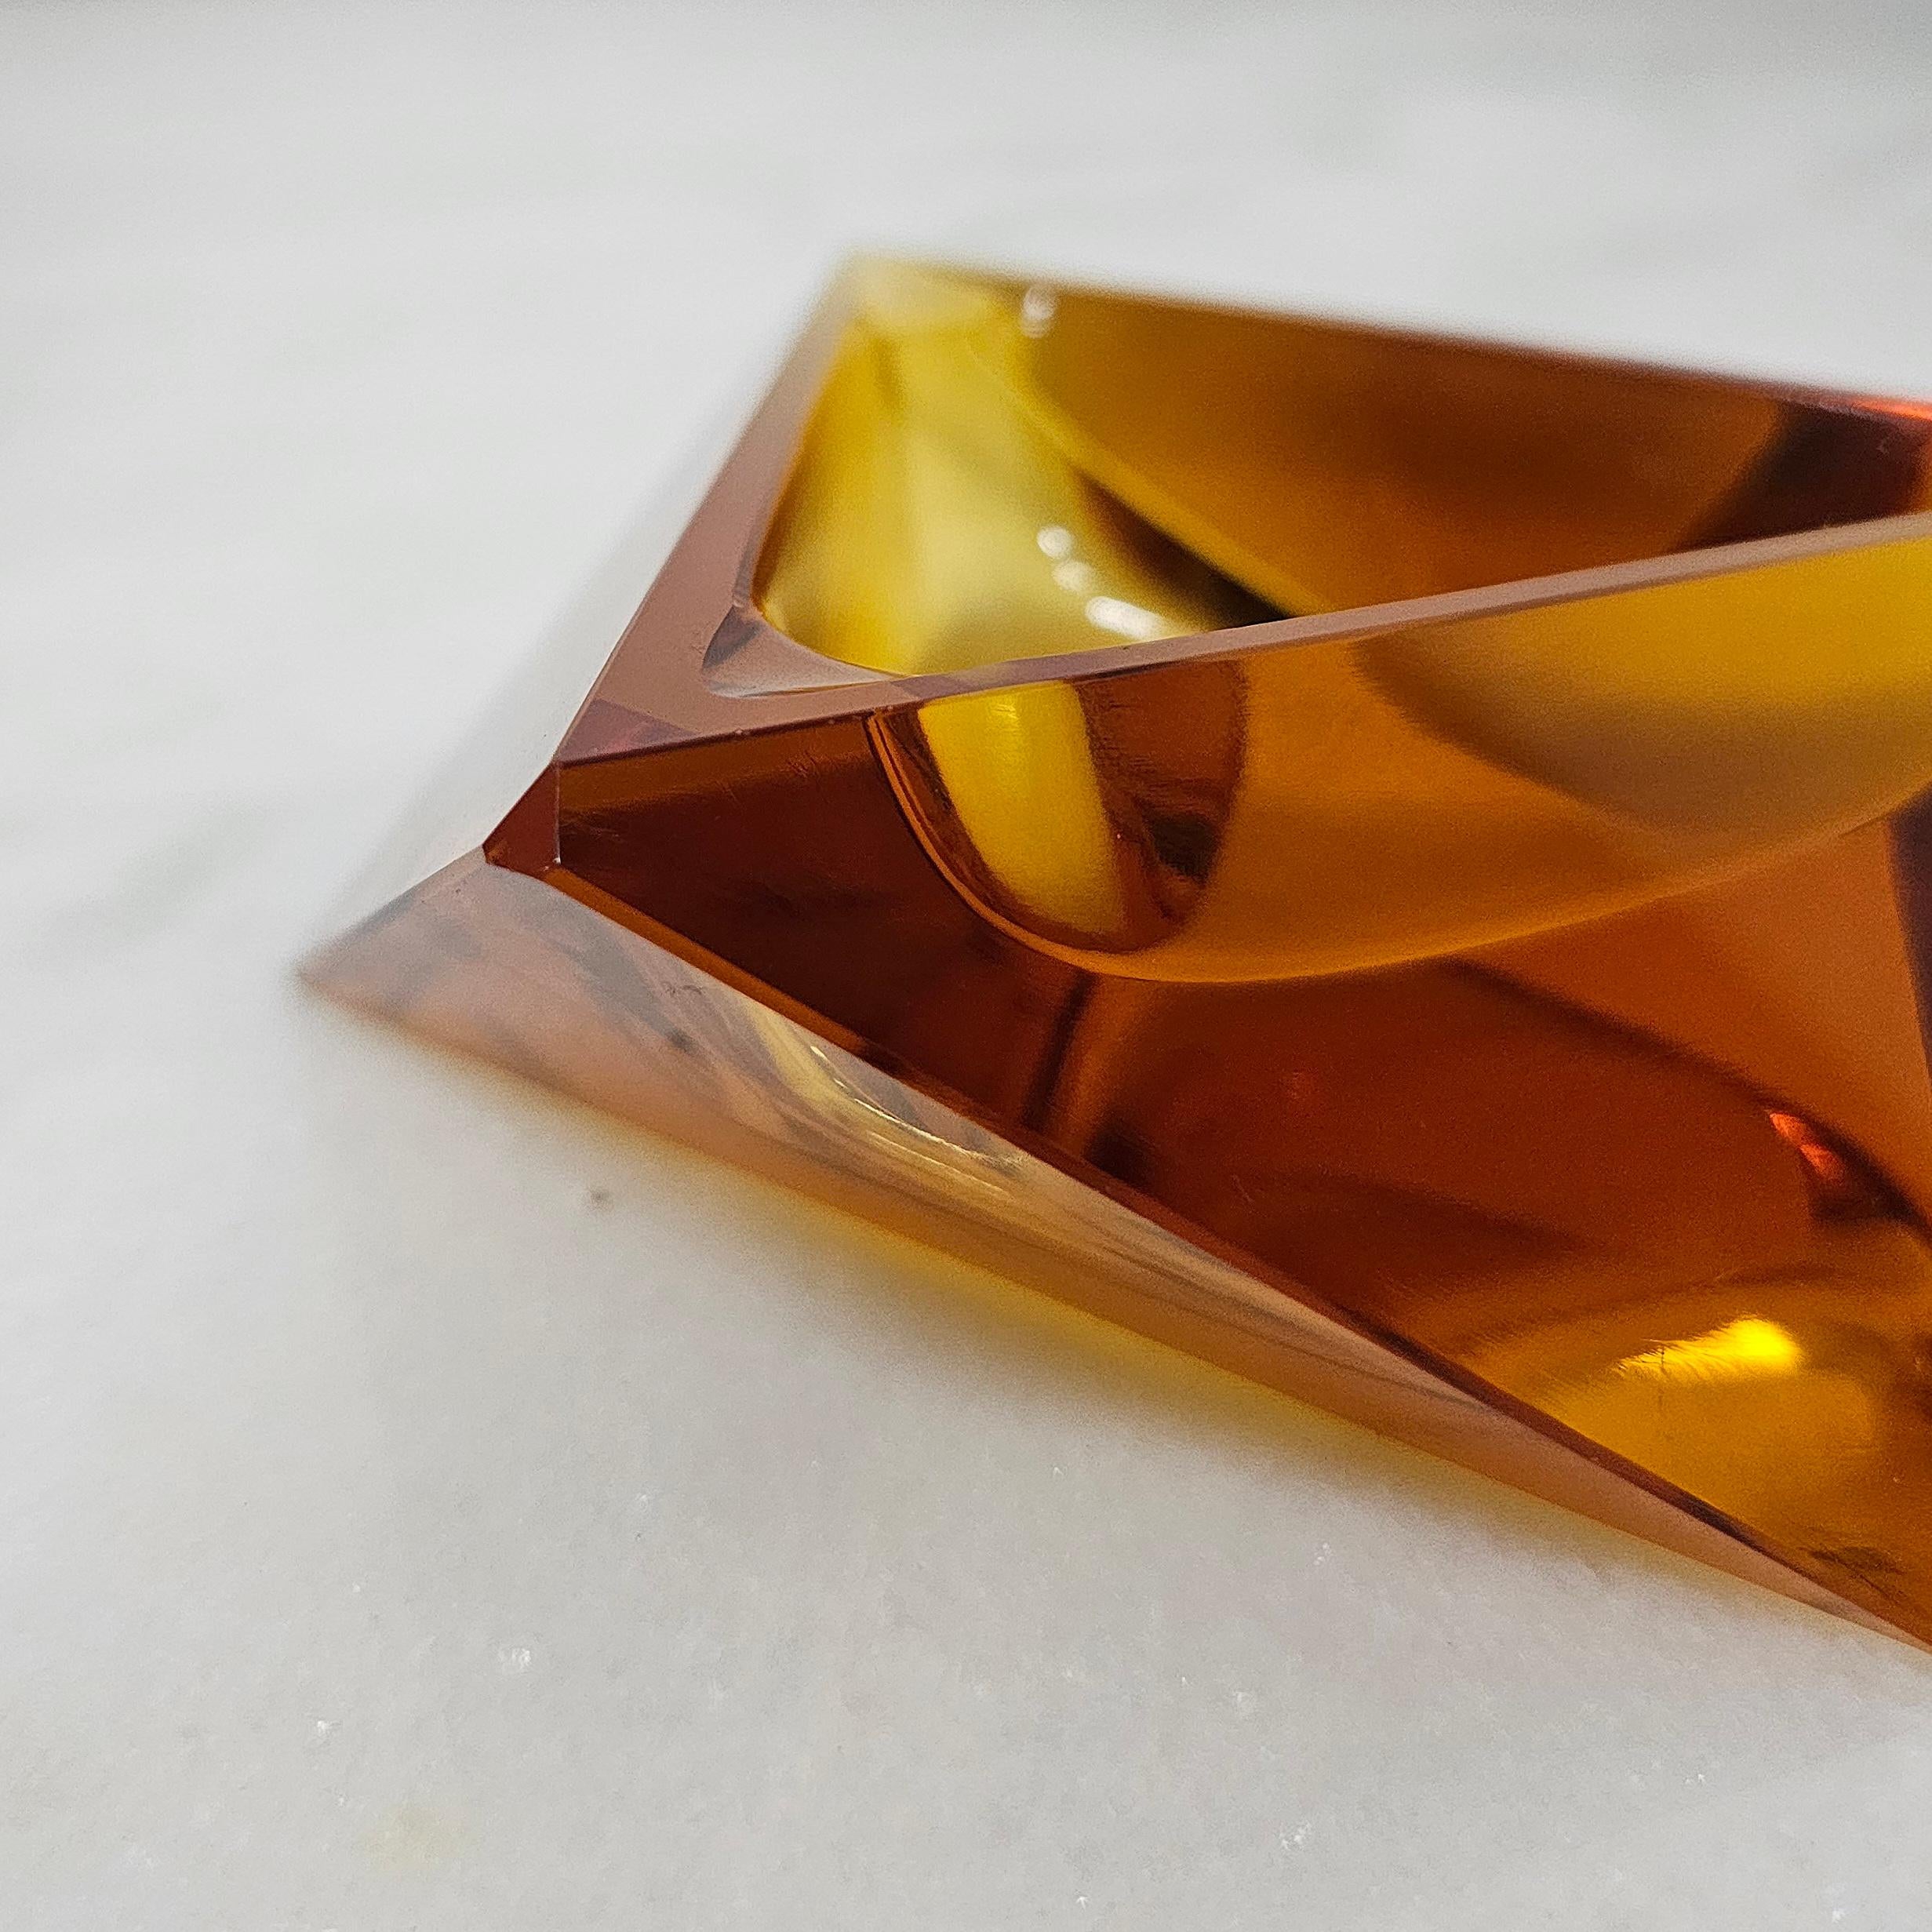 Simpatic decorative object/ashtray with size contained, hexagonal shape with smooth corners, made of Murano glass in shades of caramel and amber. Flavio Poli, Italy 70s.


Note: We try to offer our customers an excellent service even in shipments